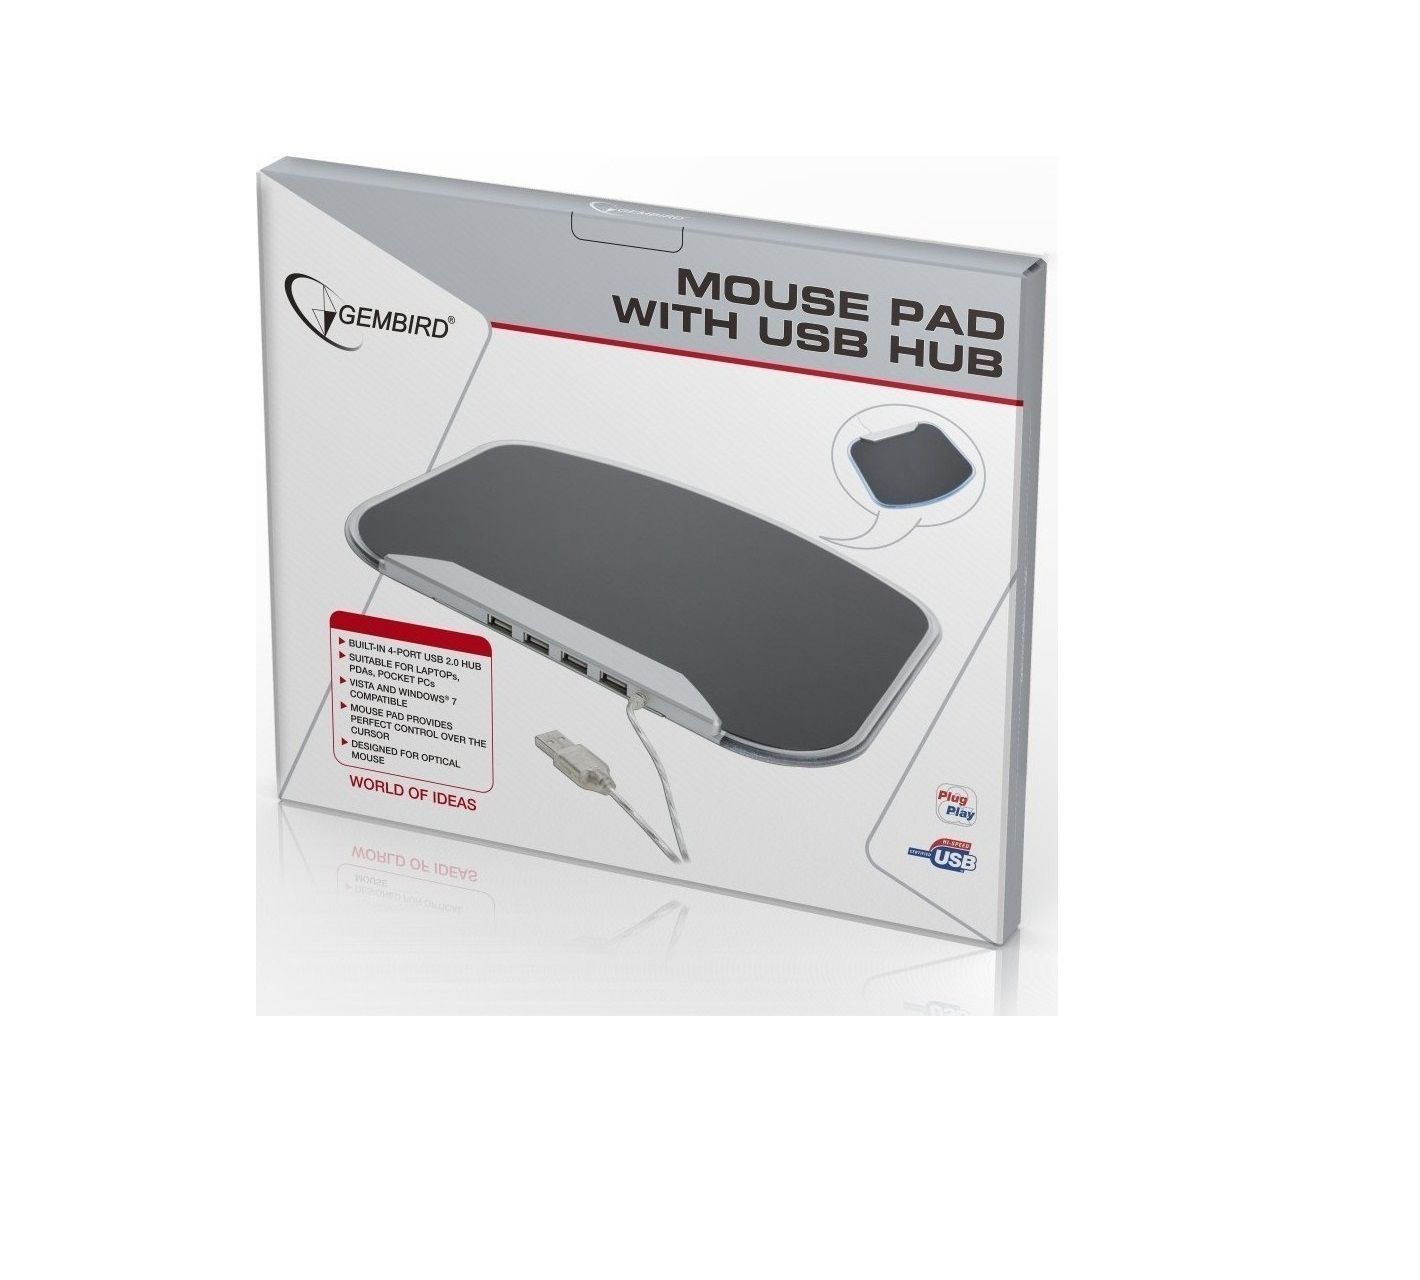 MOUSEPAD WITH USB 2.0 HUB FOR FOUR USB DEVICES GEMBIRD